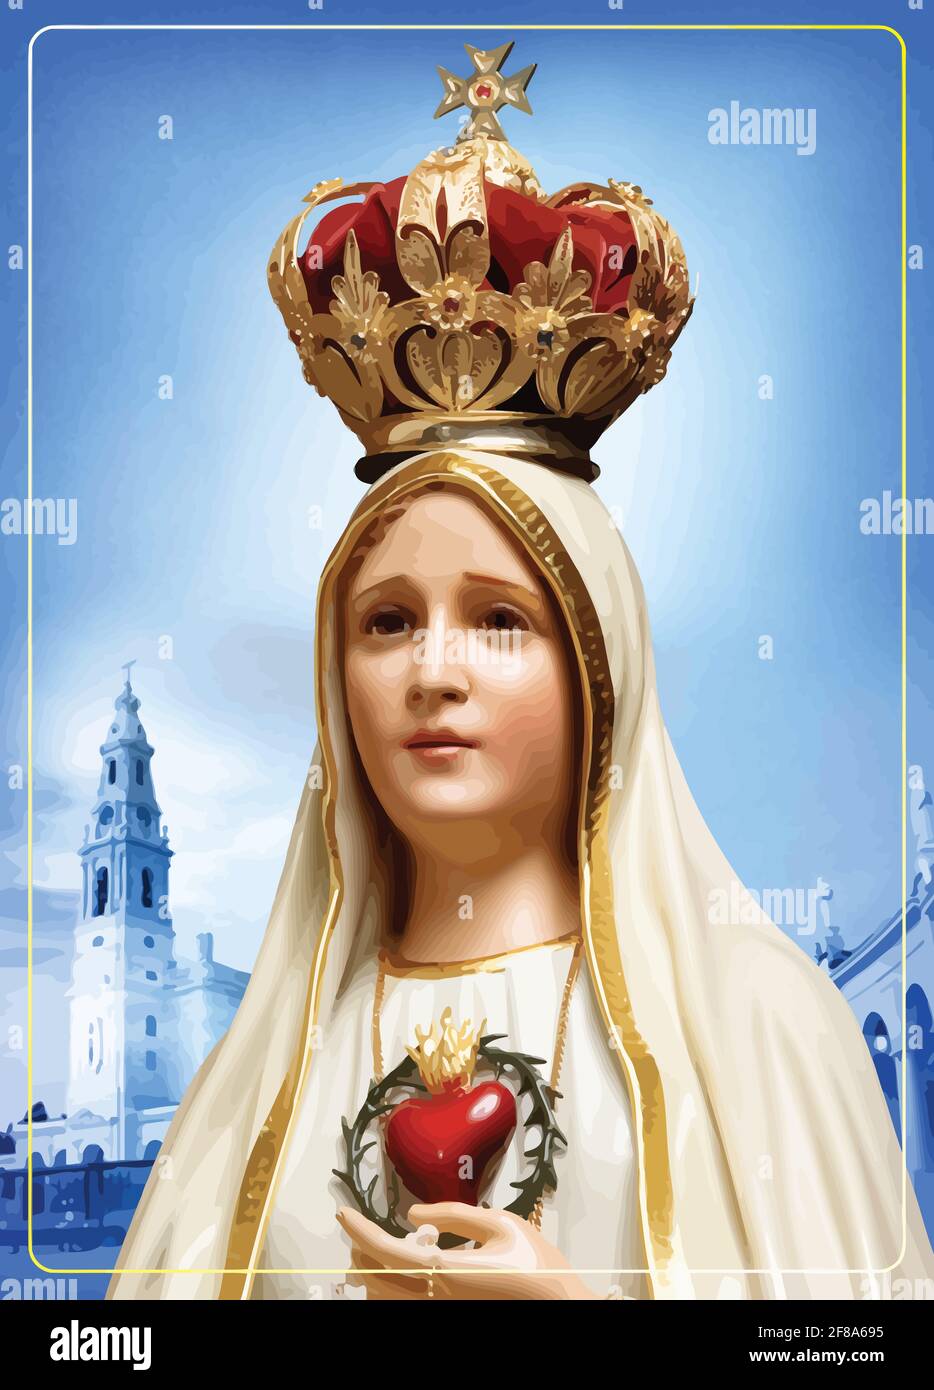 What is the meaning of the Sacred Heart and the Immaculate Heart?